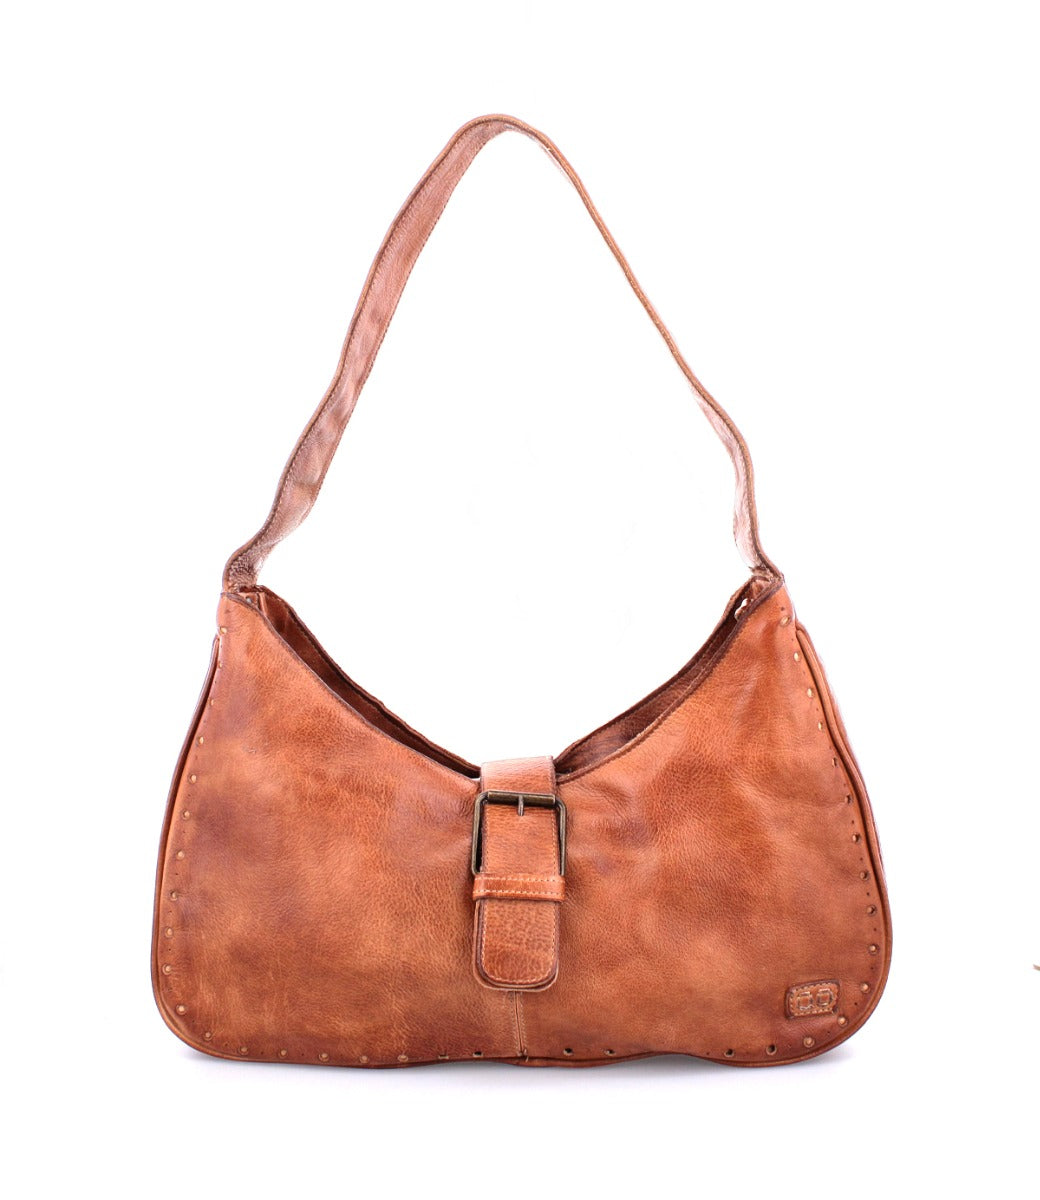 An Arleth handbag by Bed Stu, made of brown leather with a buckle.